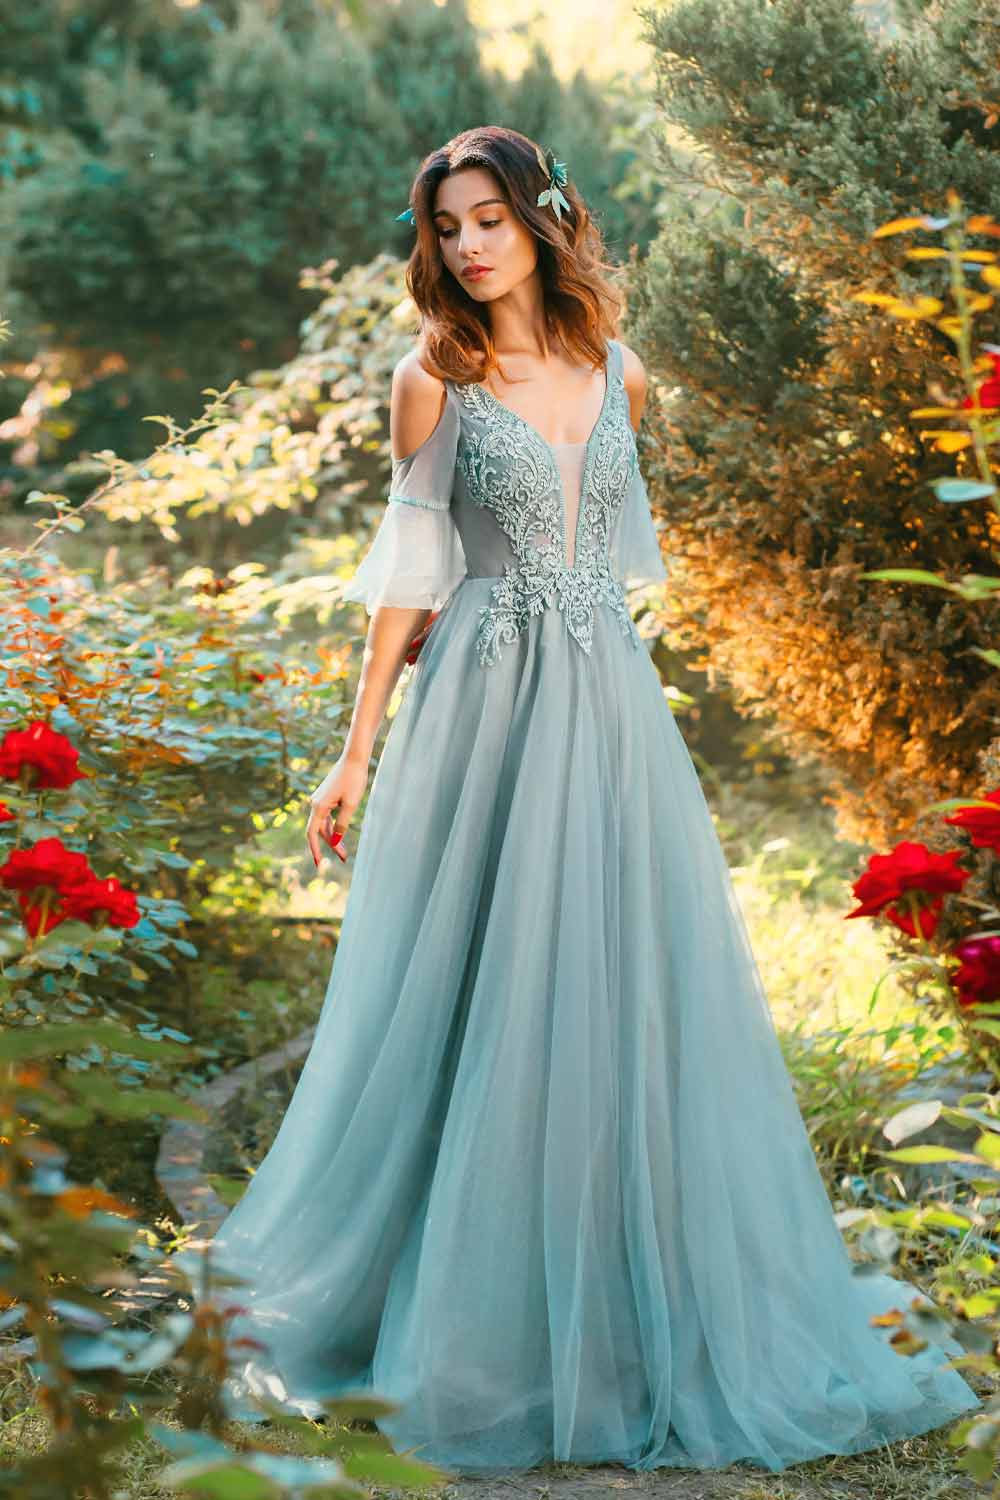 44 Graduation Dresses And Some Tips How To Choose The Best Dress